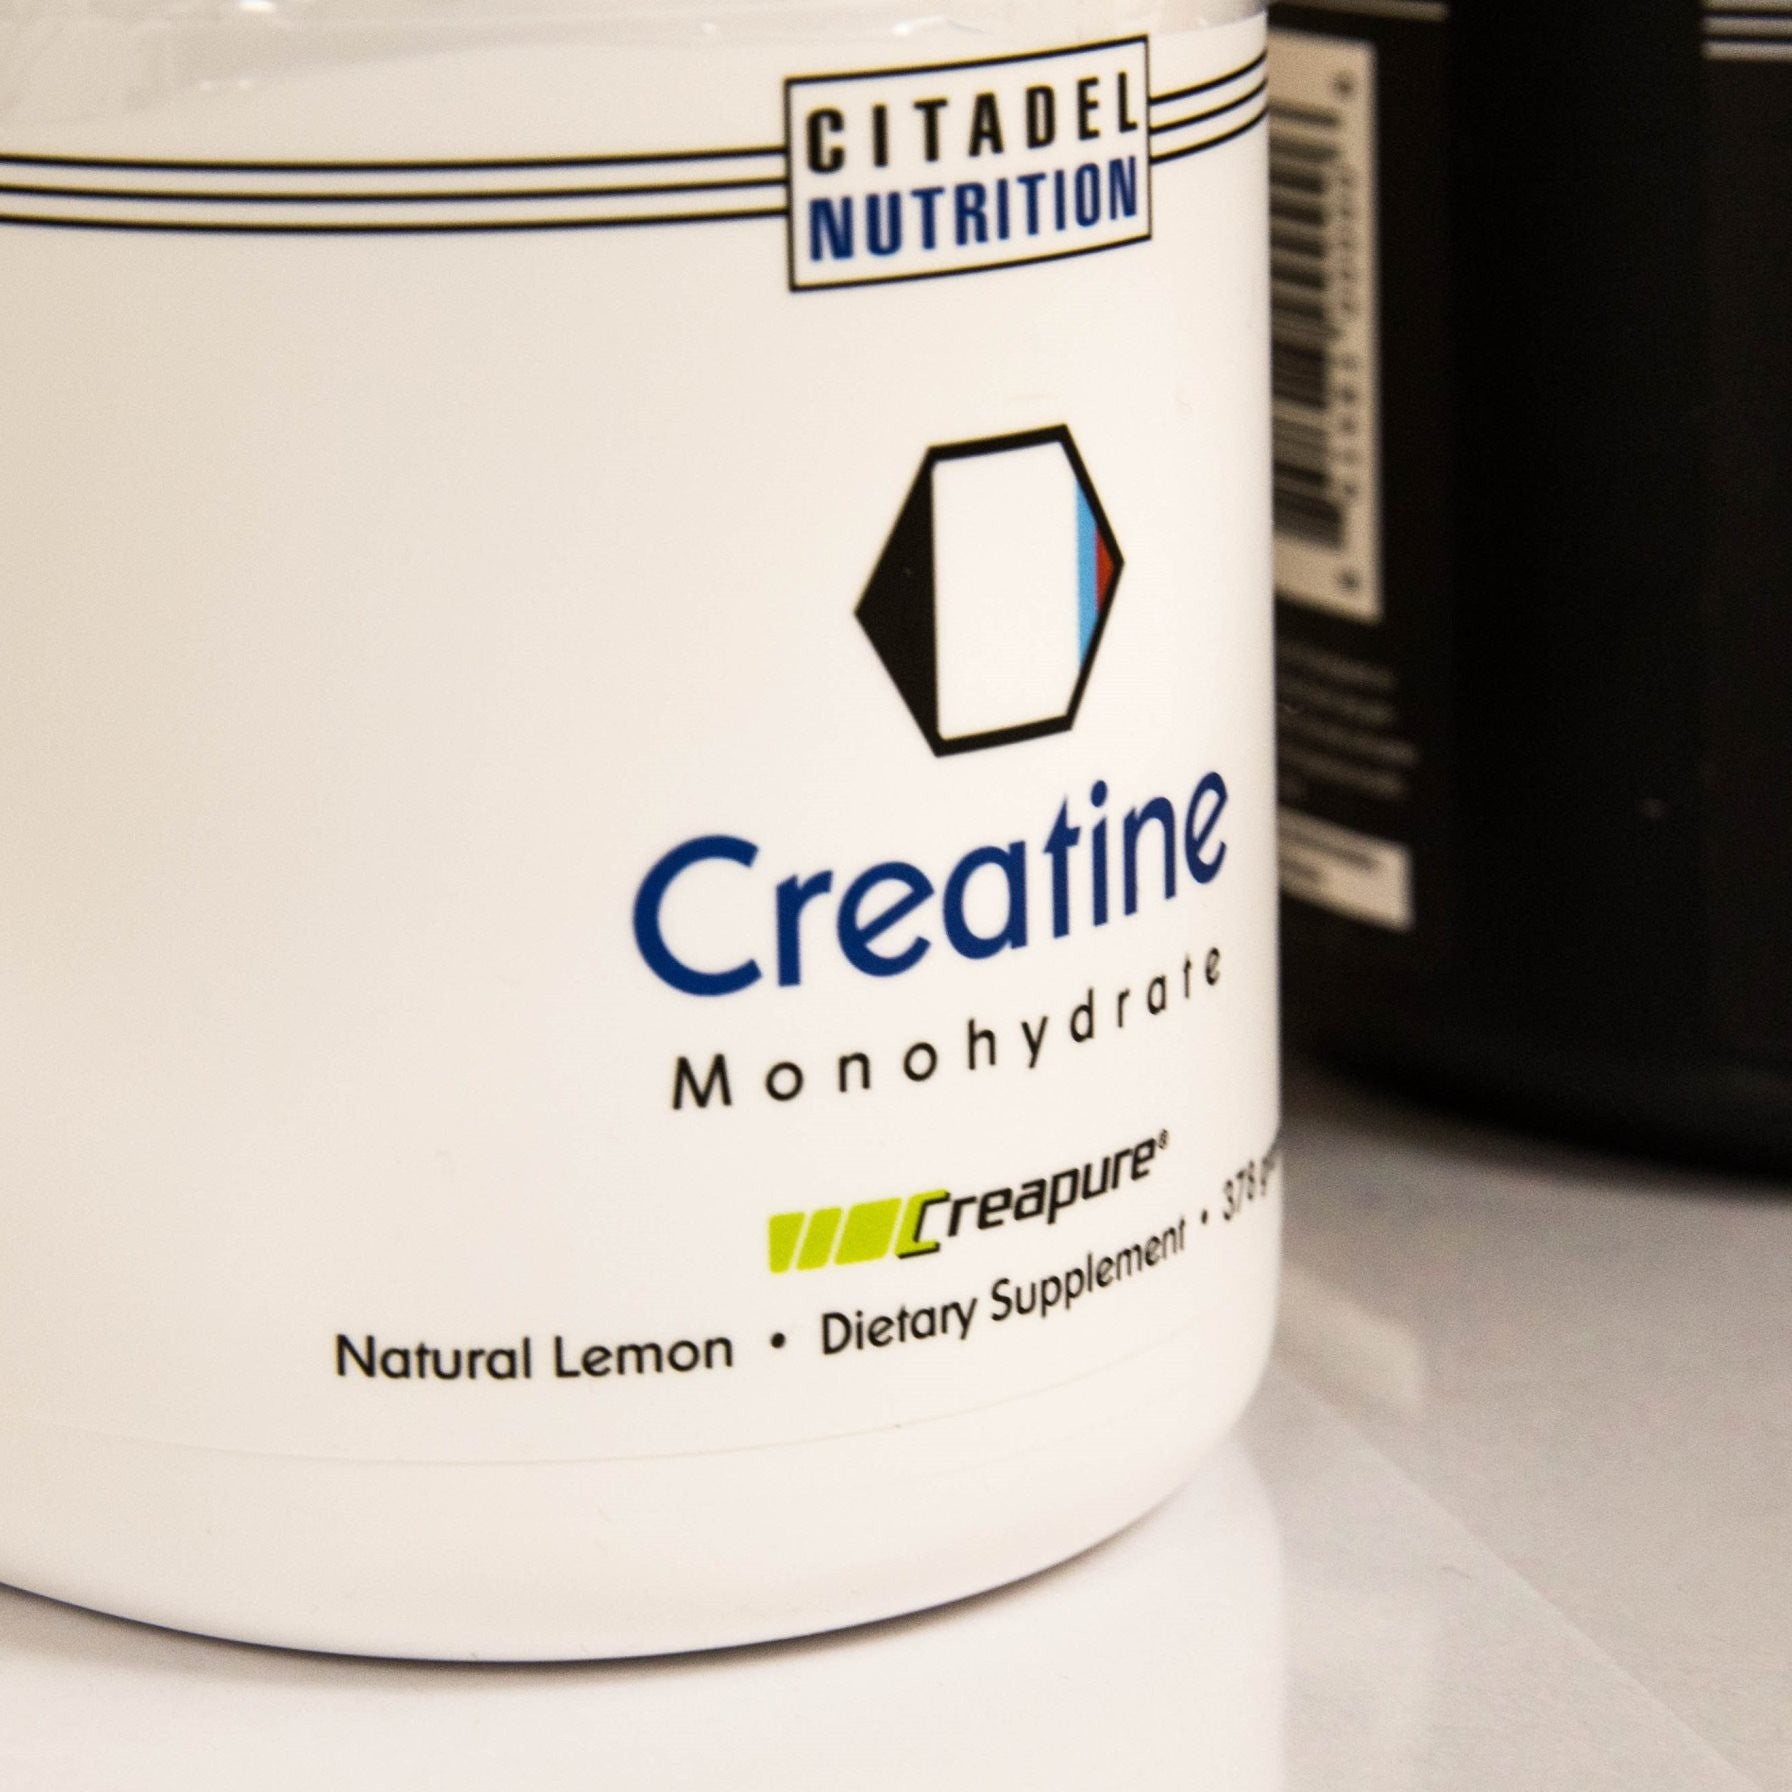 "Type" of Creatine Doesn't Matter. Don't Fall For The Hype.